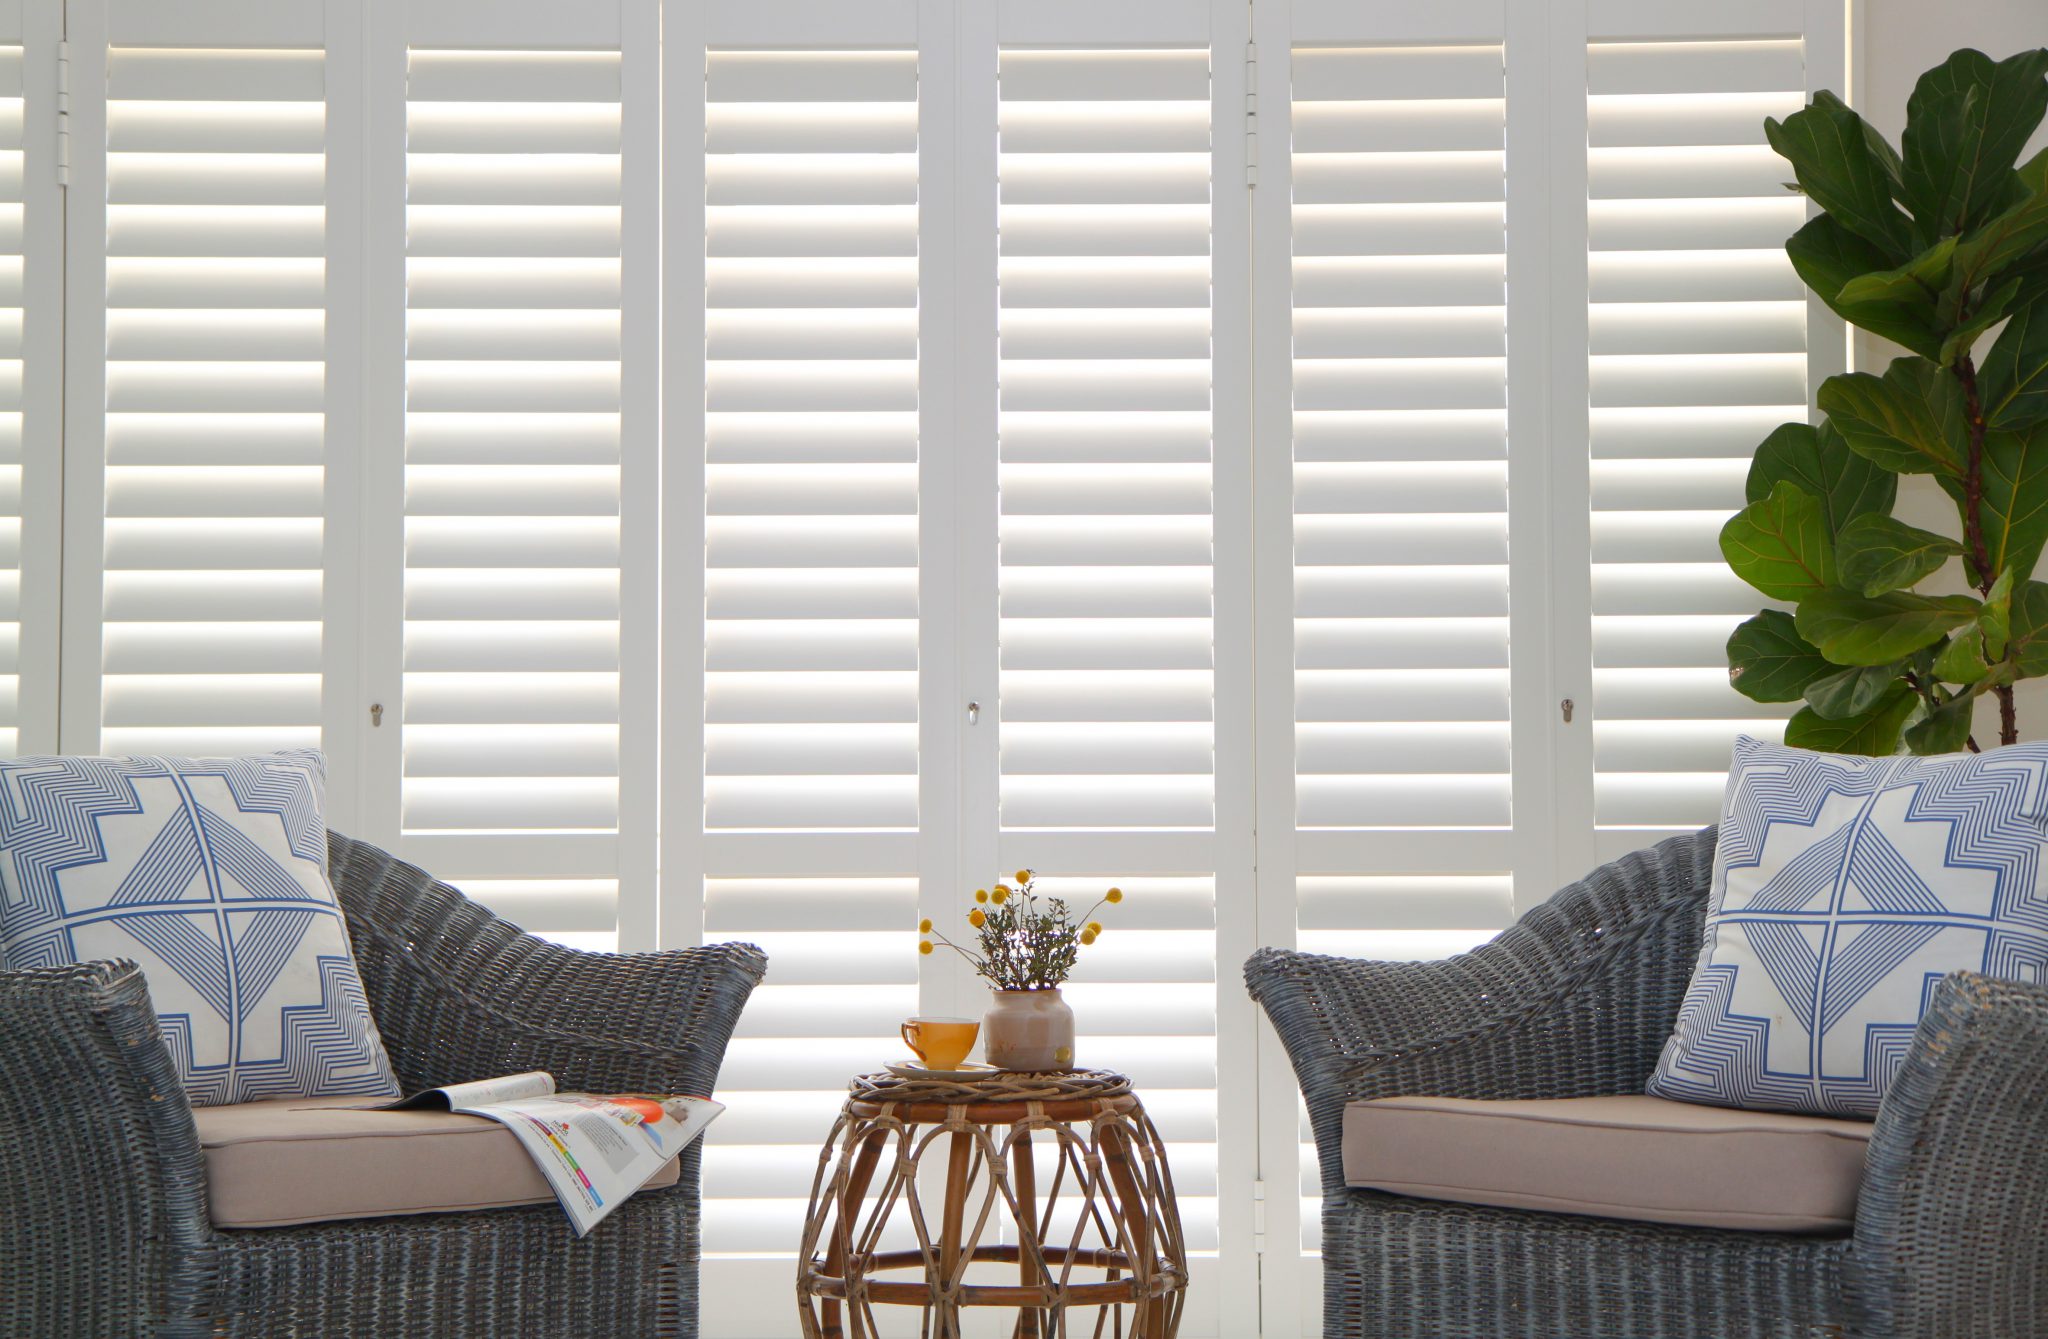 The Disadvantages of Plantation Shutters